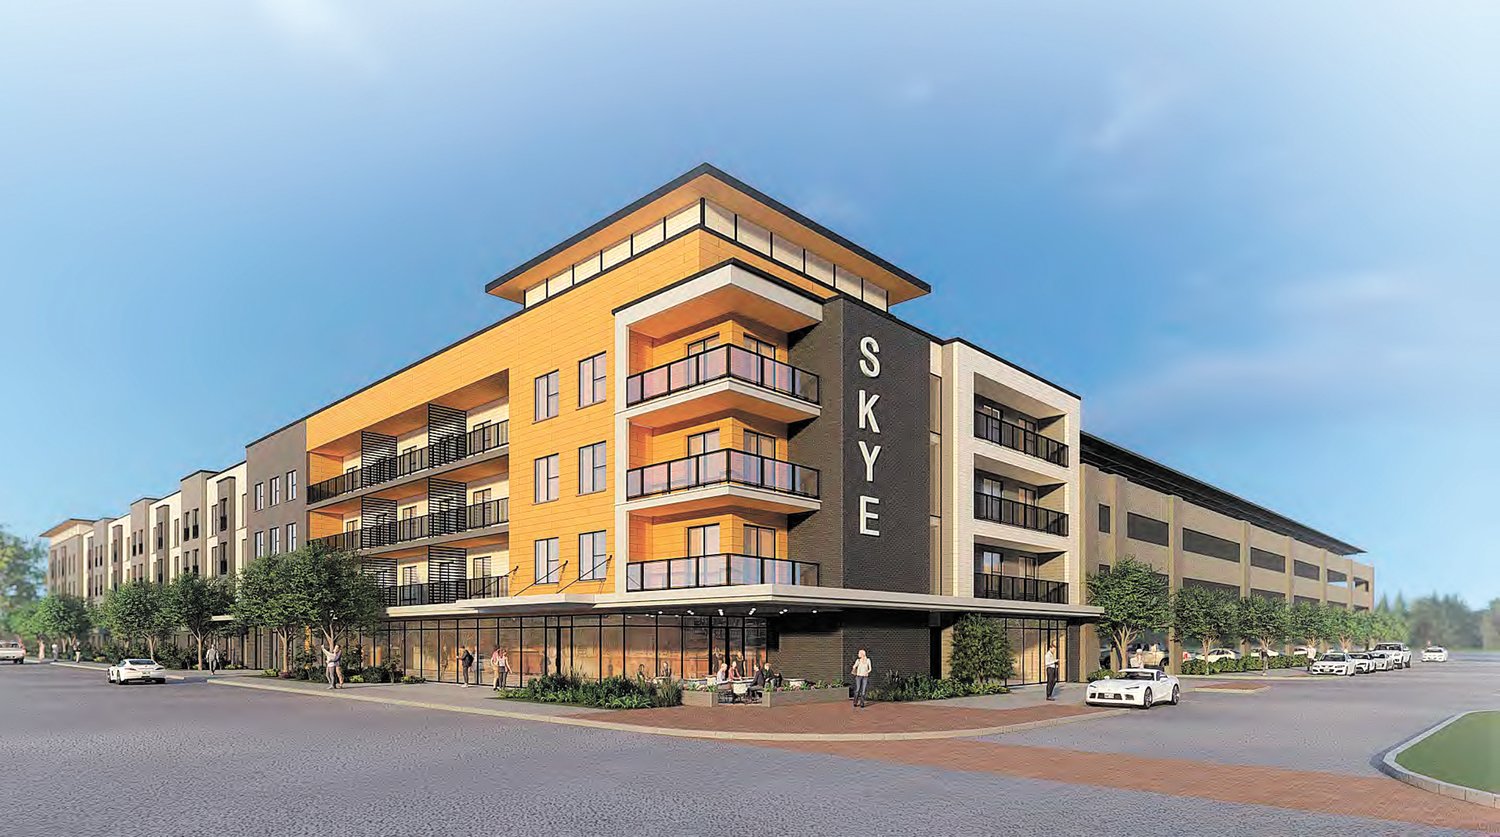 ONCE PLANNED, NEW PROPOSED: With the demand for office space declining and need for housing soaring, developer Mike Integlia is looking to build apartments on Jefferson Boulevard, not the offices as depicted in next photo.